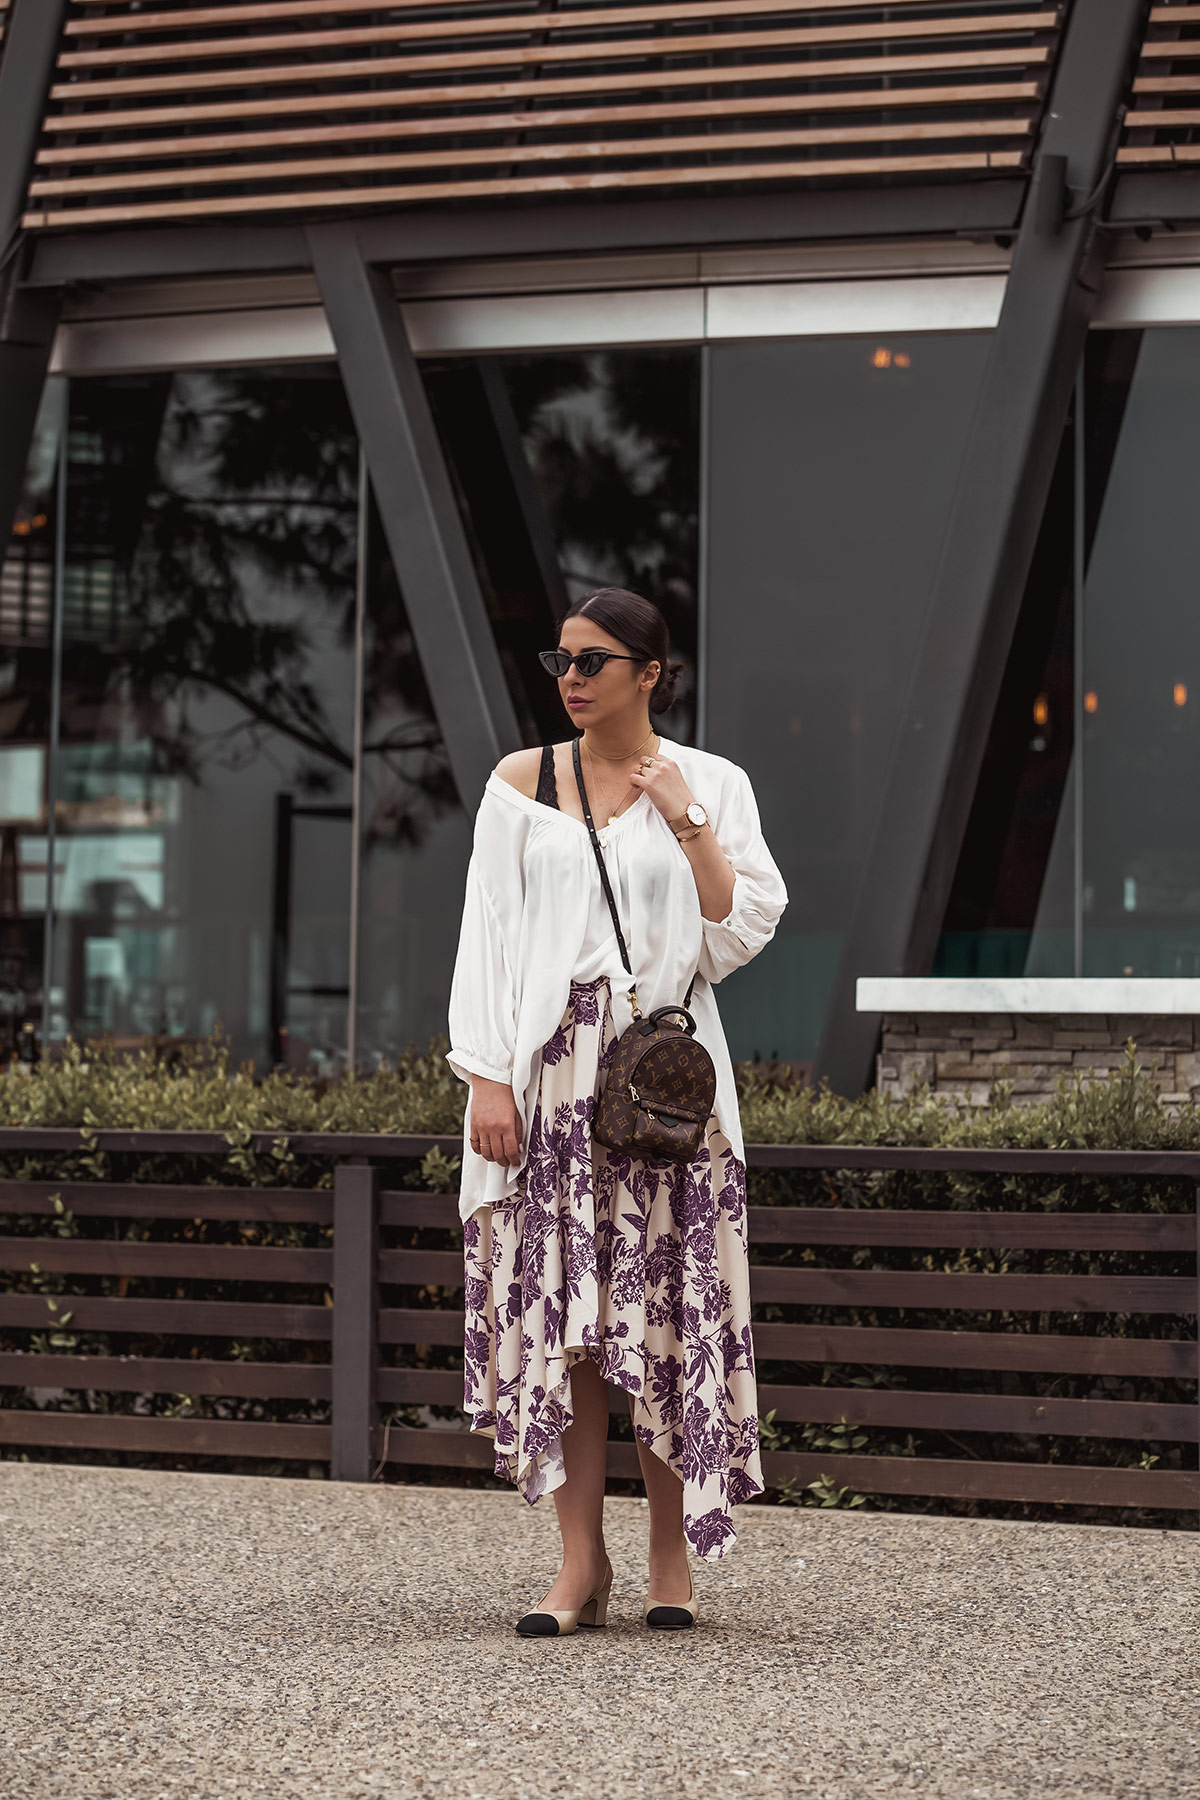 Oversized look by Stella Asteria - 5 Tips To Rock The Oversized Look